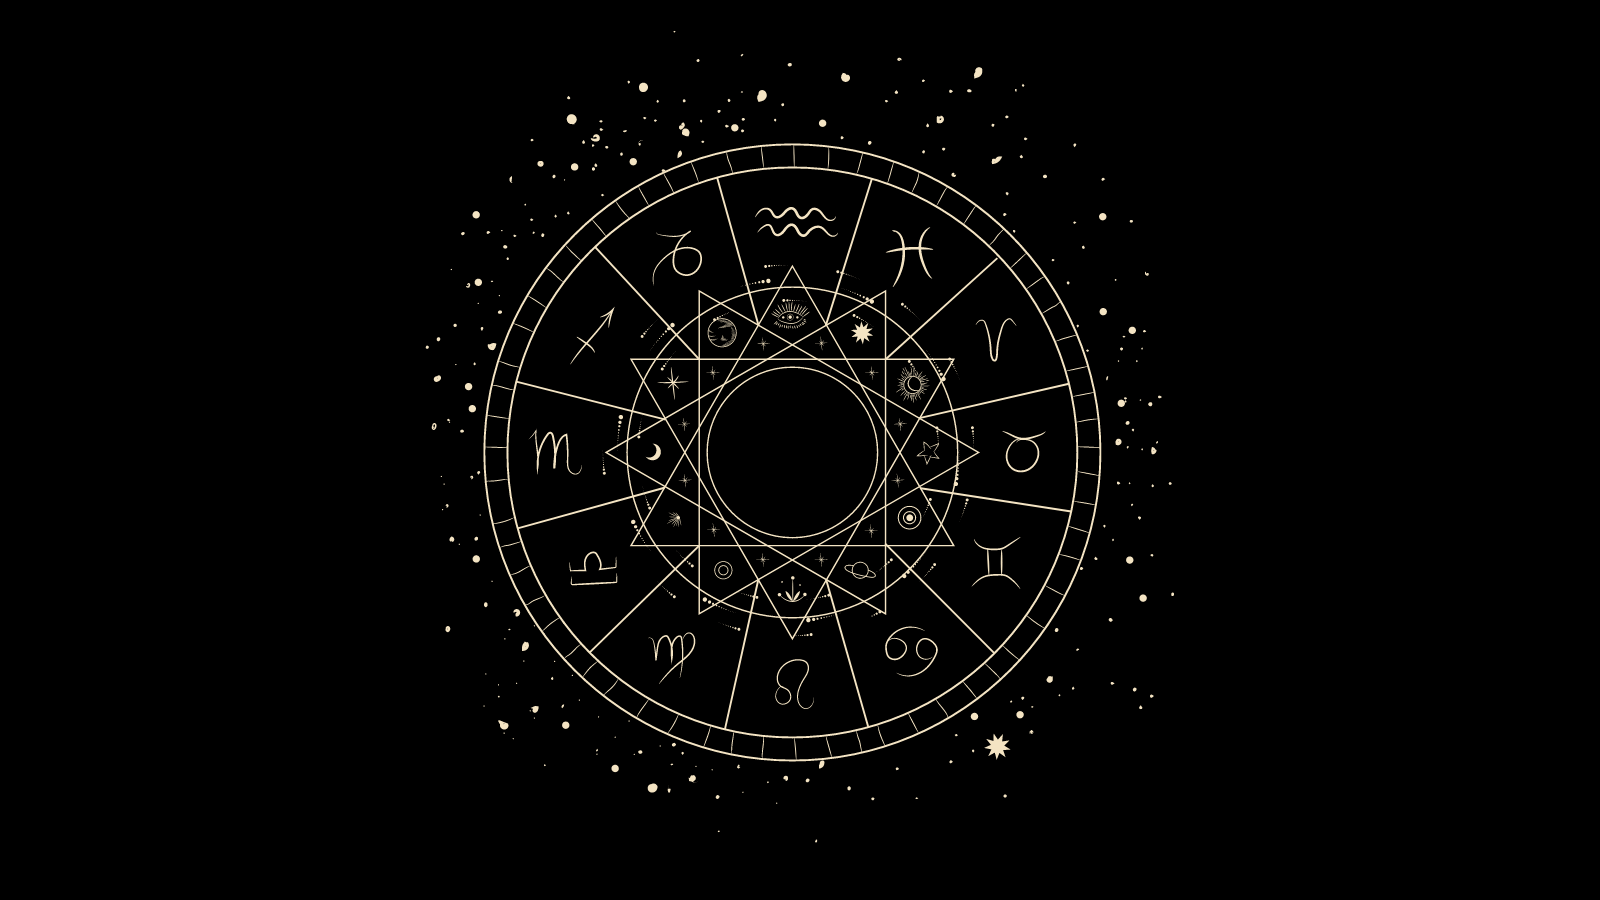 The wheel of all the astrology signs